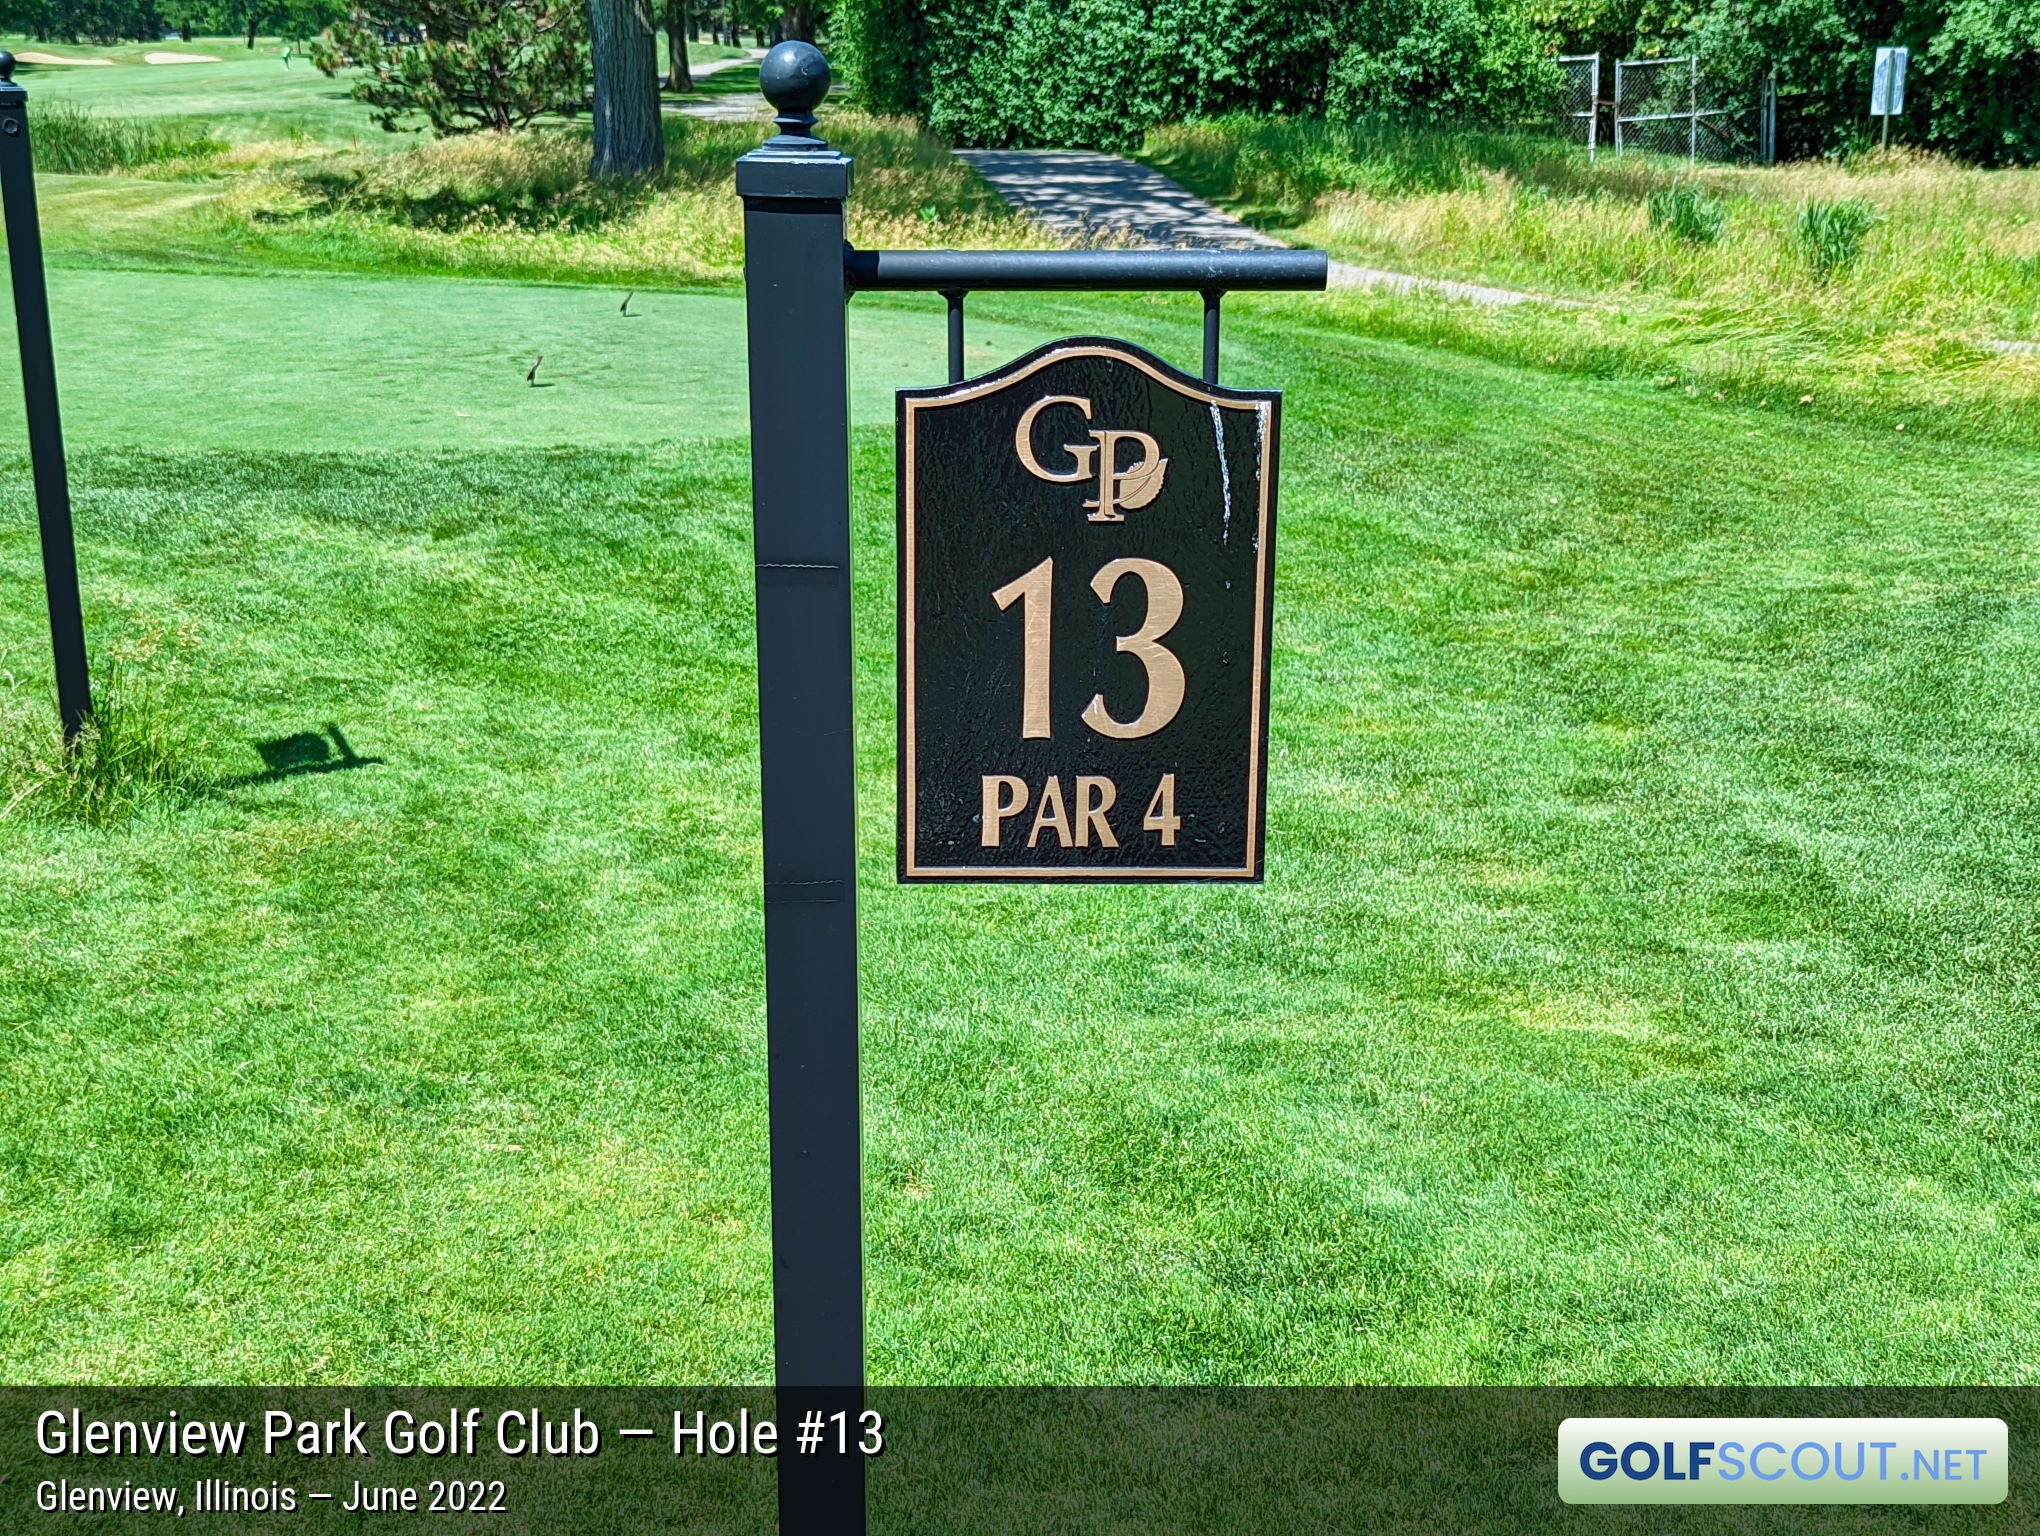 Photo of hole #13 at Glenview Park Golf Club in Glenview, Illinois. 